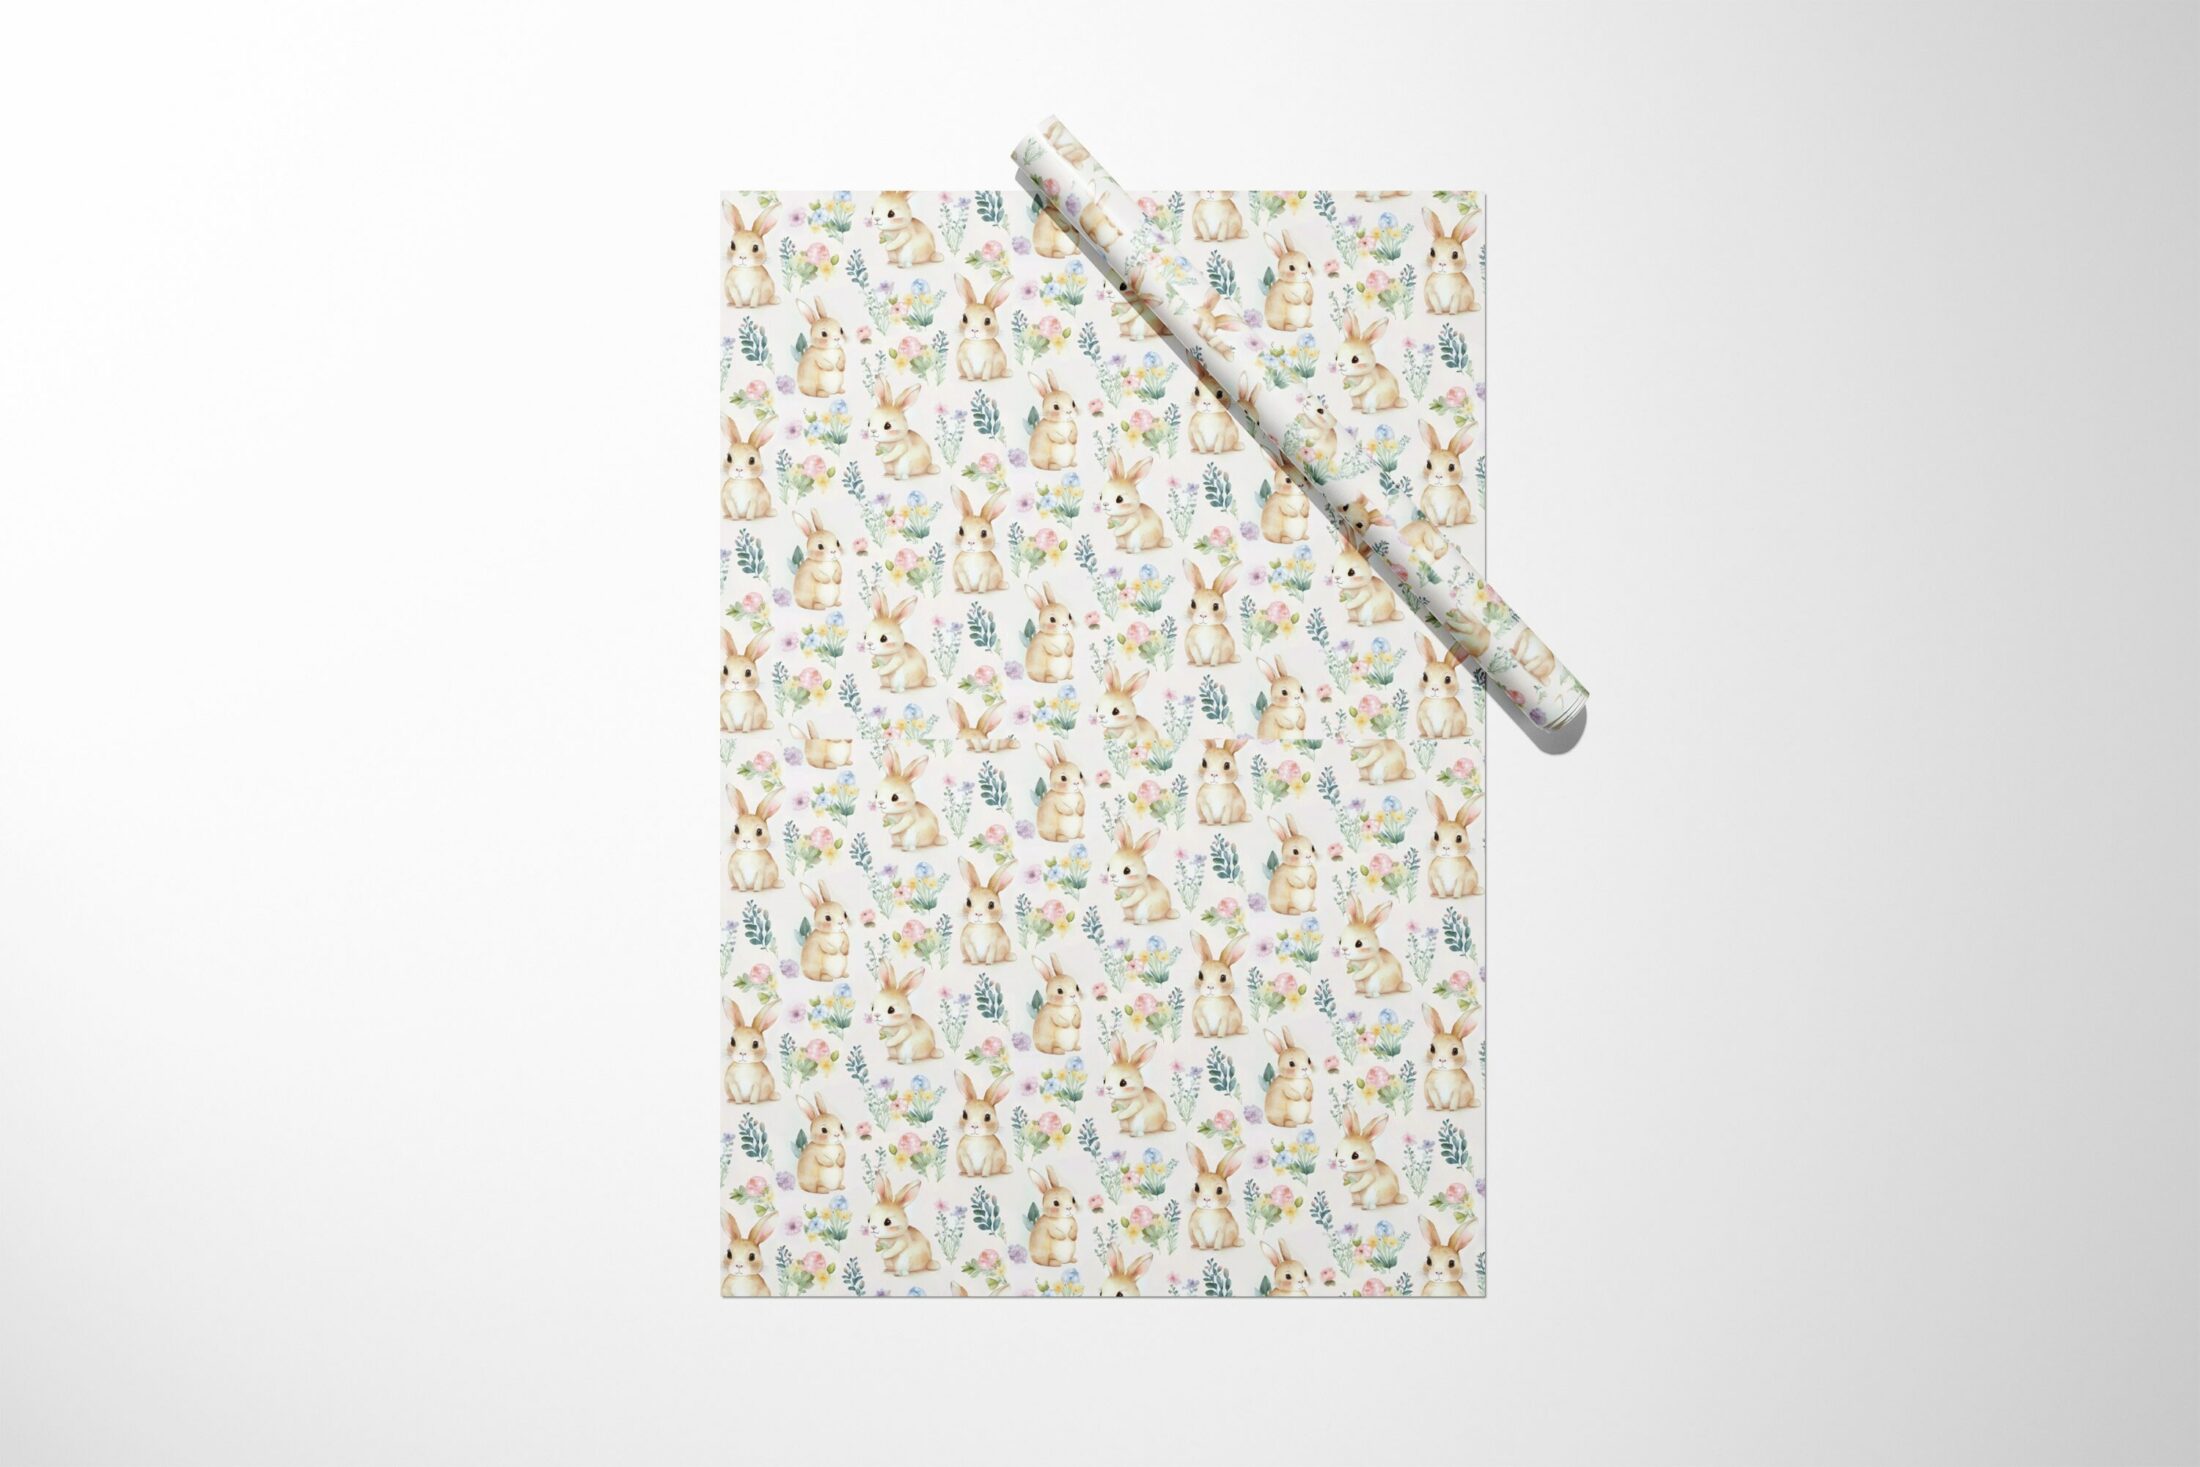 A Bunny and Floral wrapping paper with a giraffe pattern on it.